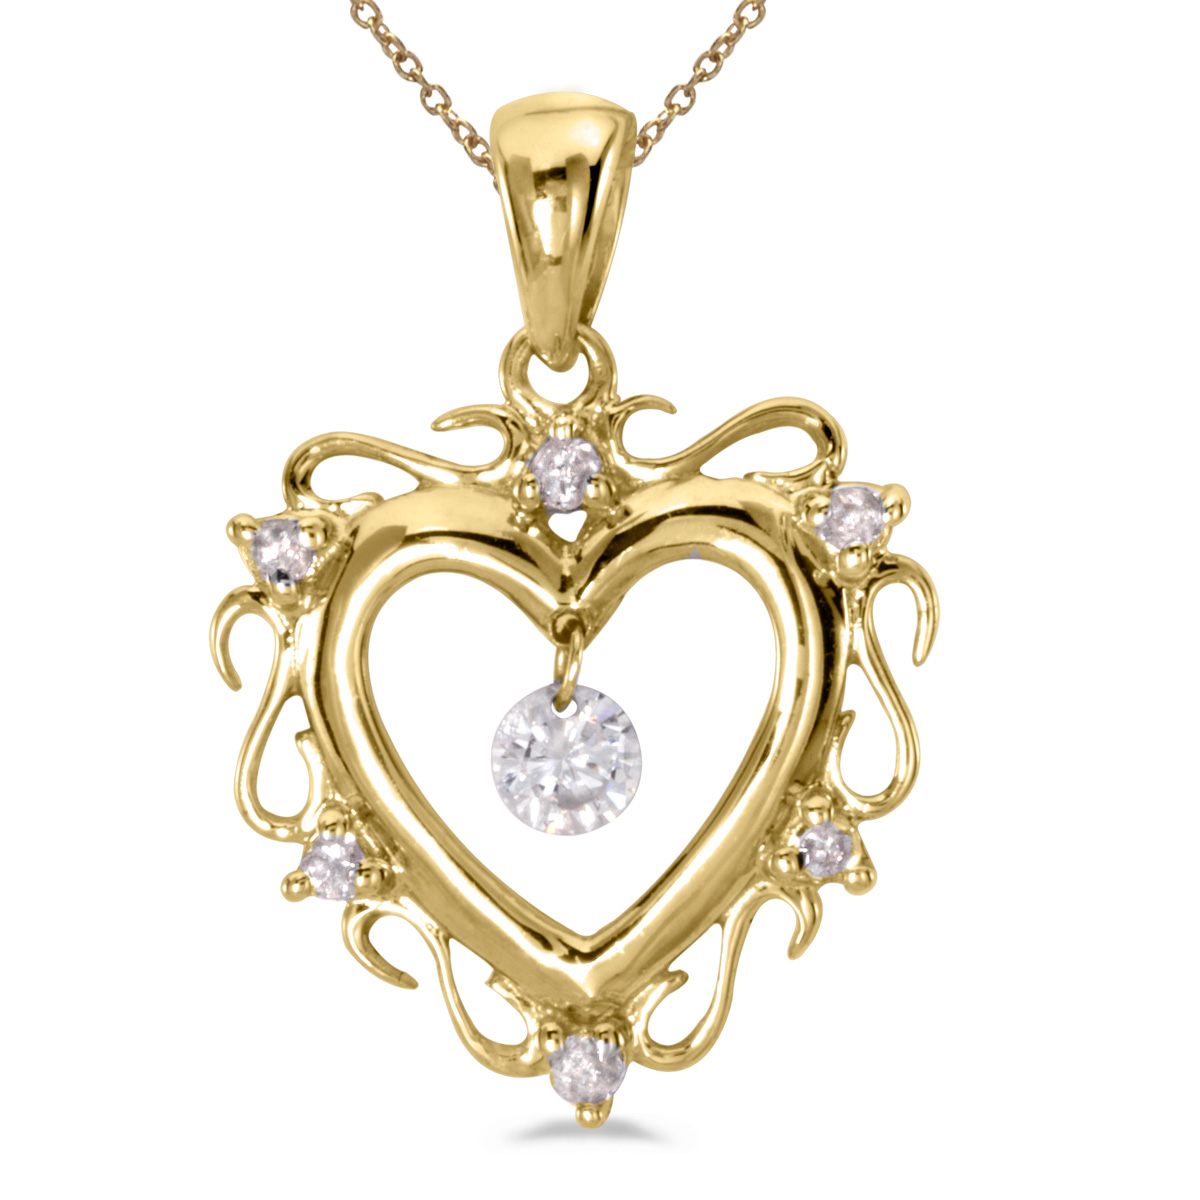 14k gold Dashinng Diamonds pendant with 0.13 total ct diamonds. The center dangling diamond dances and shimmers with every heartbeat.